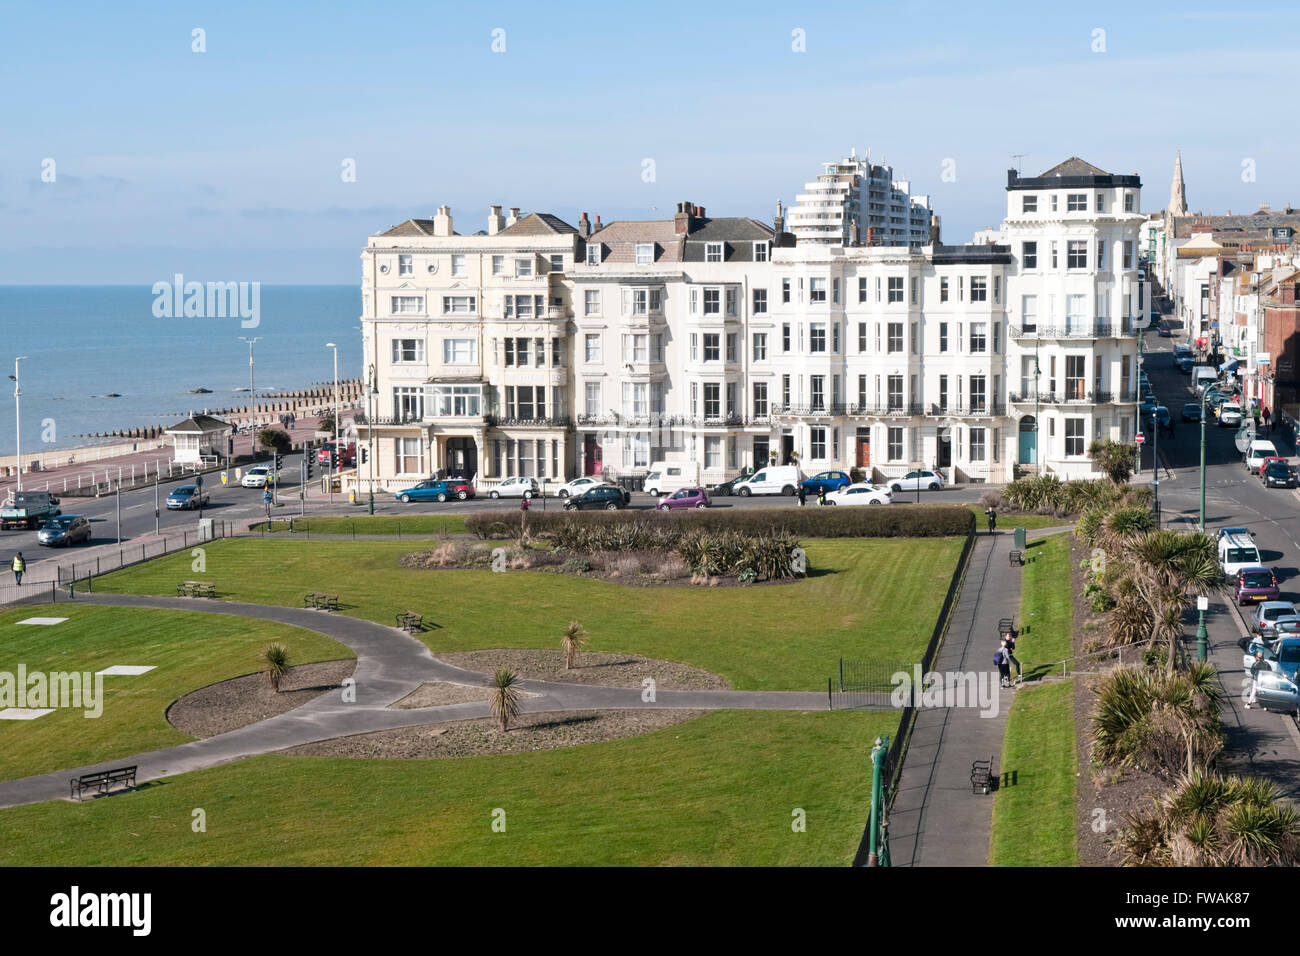 Apartment buildings overlooking the seafront and park at Warrior Square, St Leonards-on-Sea, East Sussex, England Stock Photo